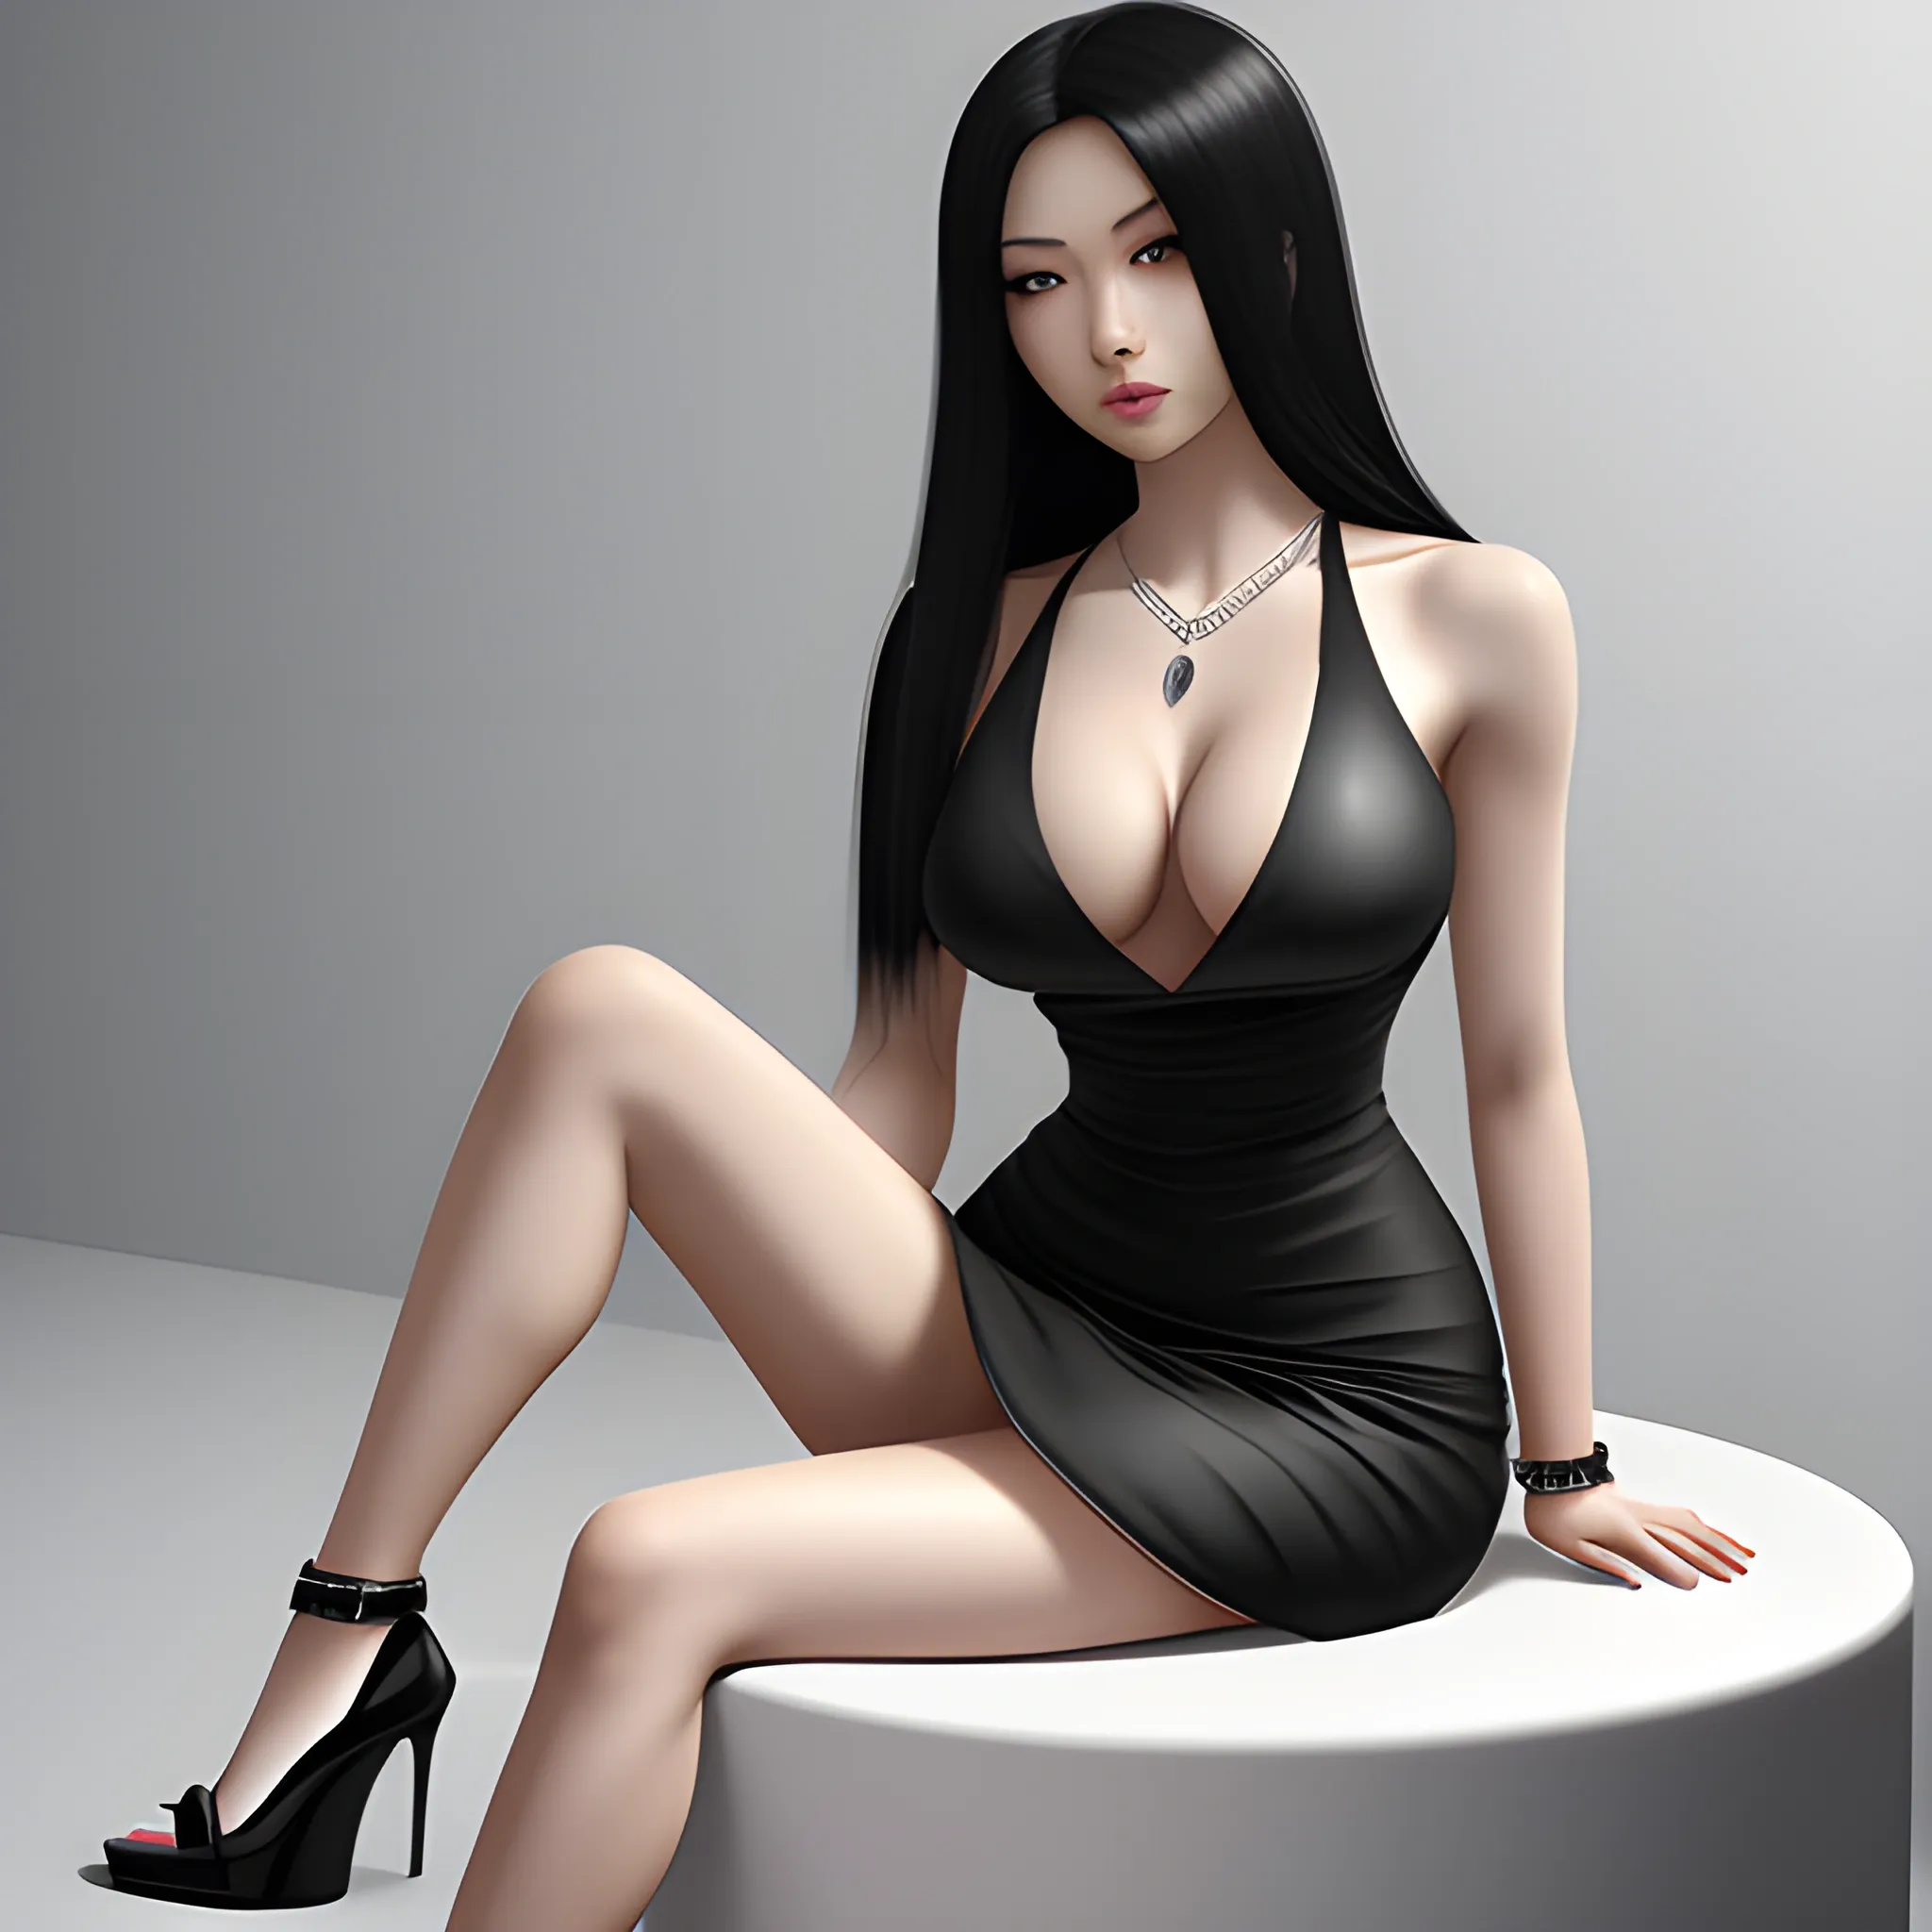 woman, asian factions, black straight hair, D cup breast, six pack, wide hips, black elegant dress, black heels, silver bangles, silver necklace, photorealistic